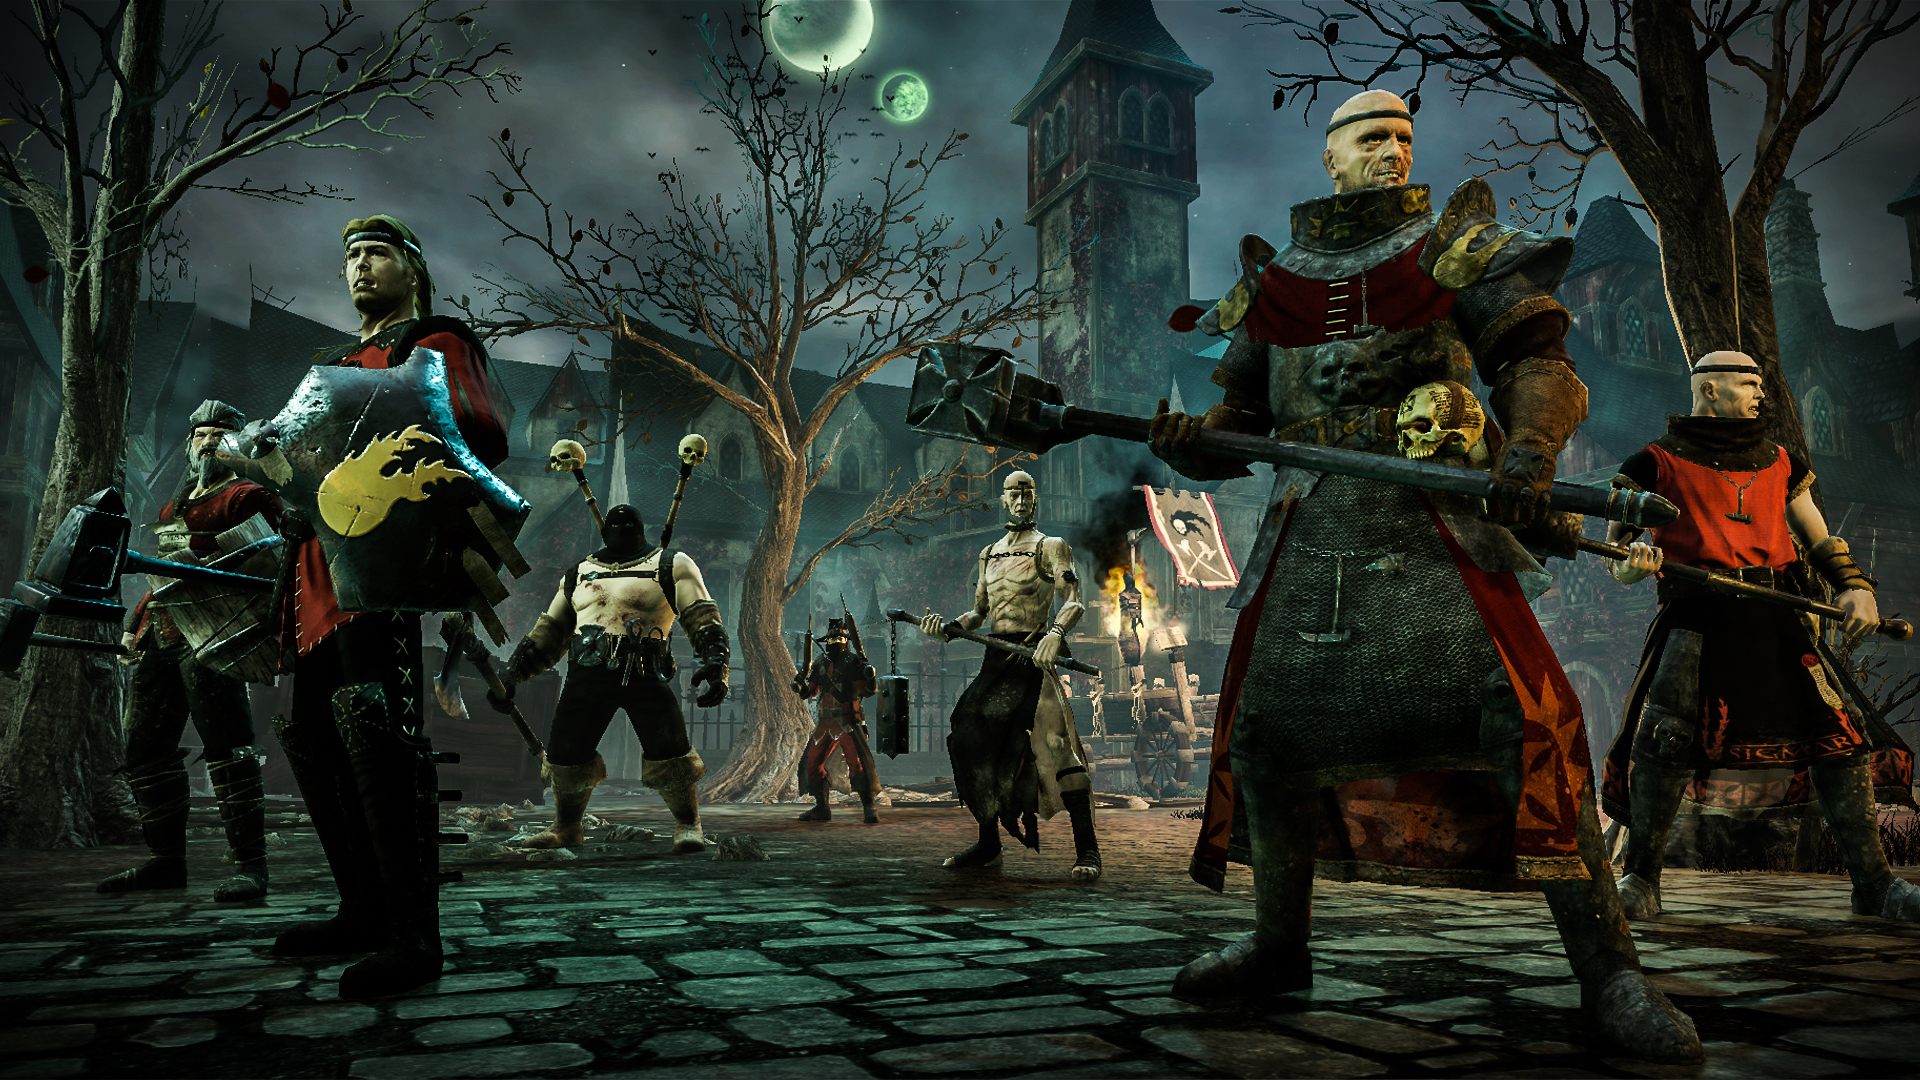 Mordheim City Of The Damned Wallpaper Video Game Hq